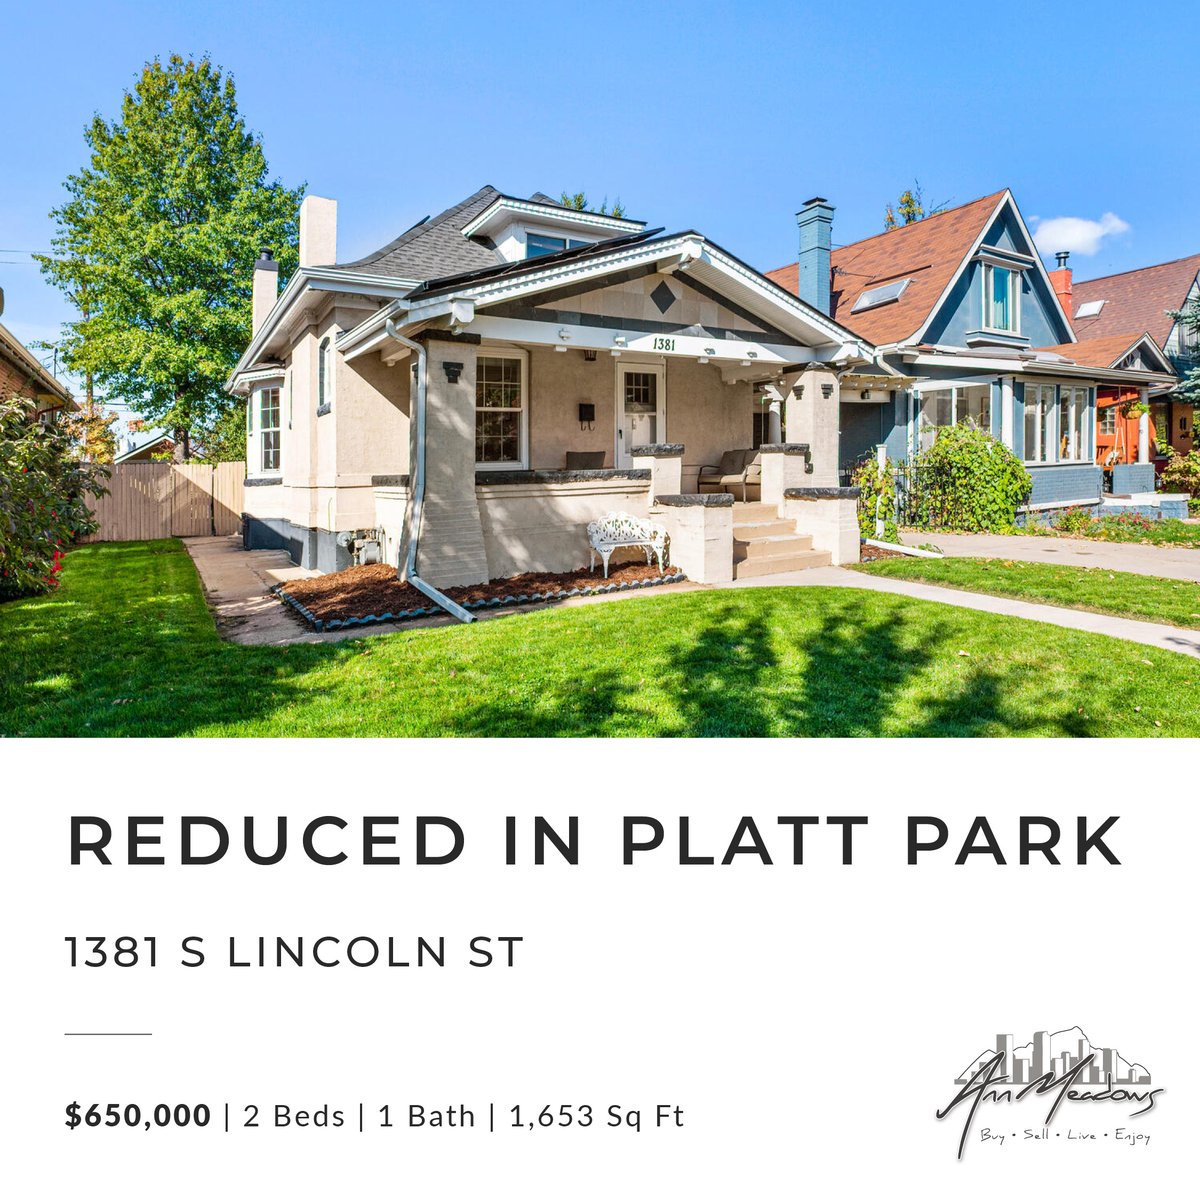 Don't miss the opportunity to live in #PlattPark at this amazing new price! This light-filled charmer is within blocks of so many of the neighborhood favorites - Adelitas, GB Fish & Chips, Snarfs, and more! #denverbungalow #remaxhustle #denvercolorado